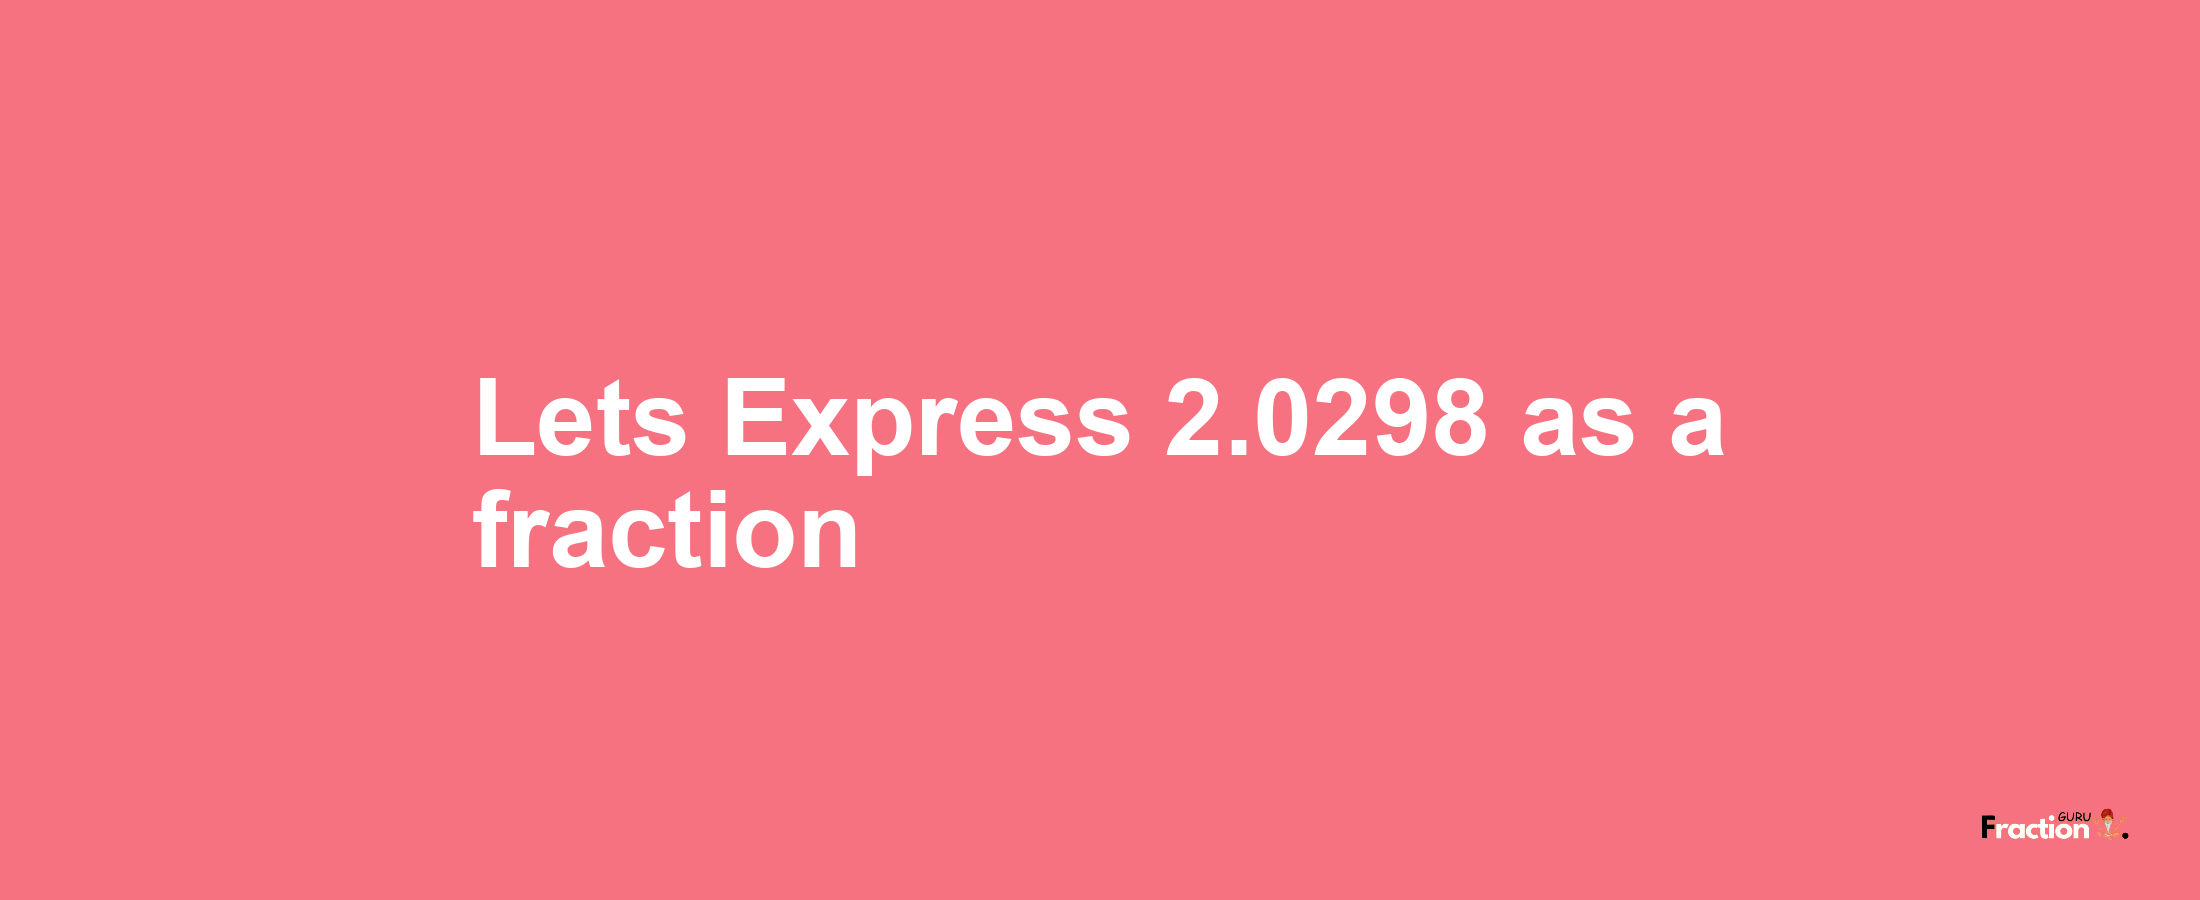 Lets Express 2.0298 as afraction